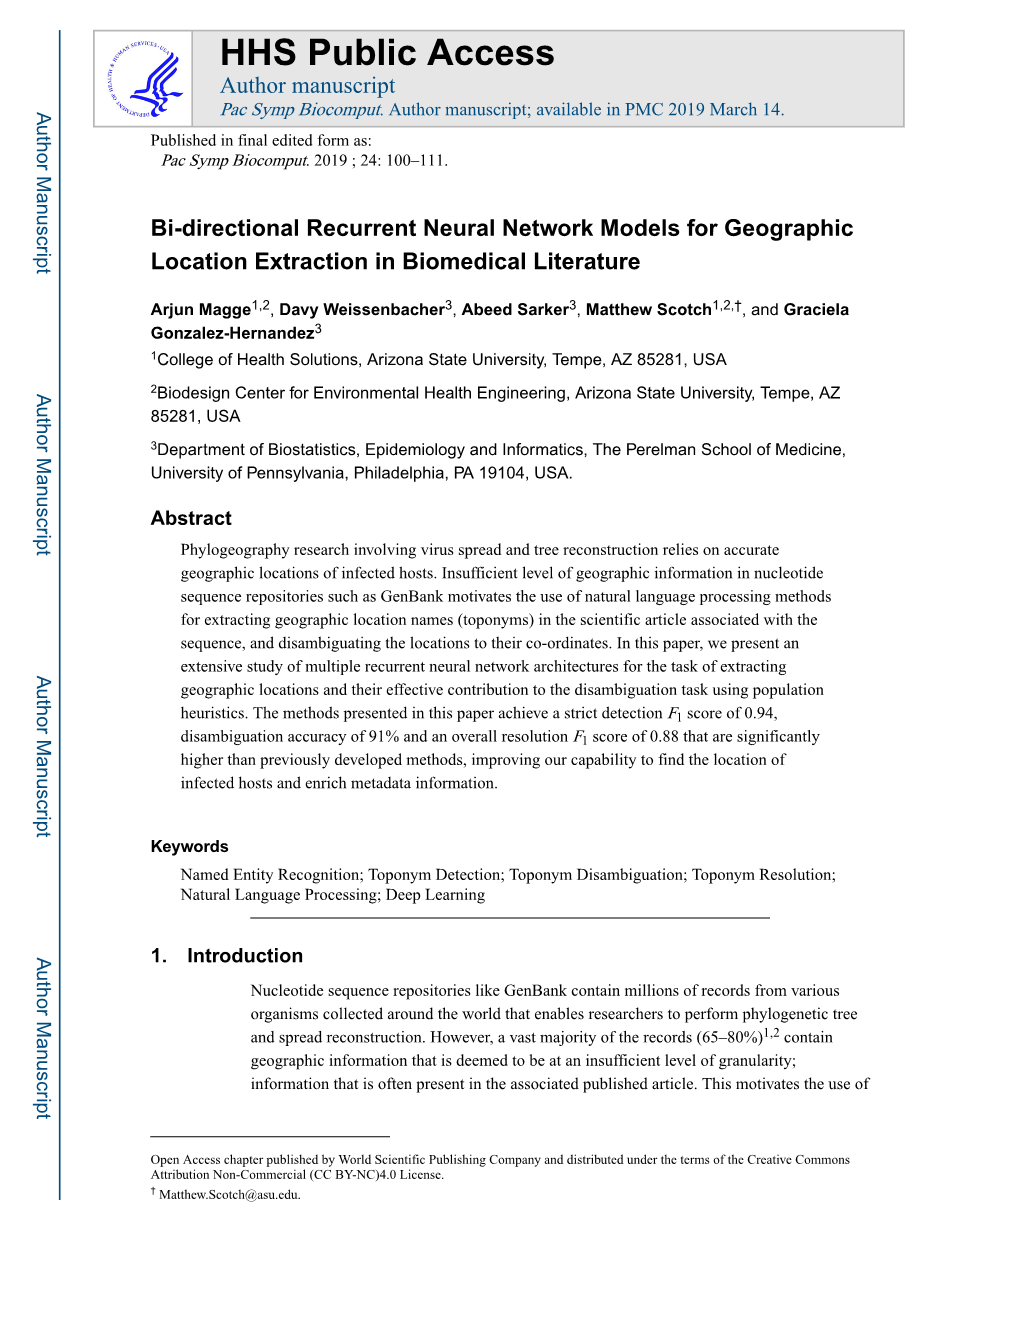 Bi-Directional Recurrent Neural Network Models for Geographic Location Extraction in Biomedical Literature